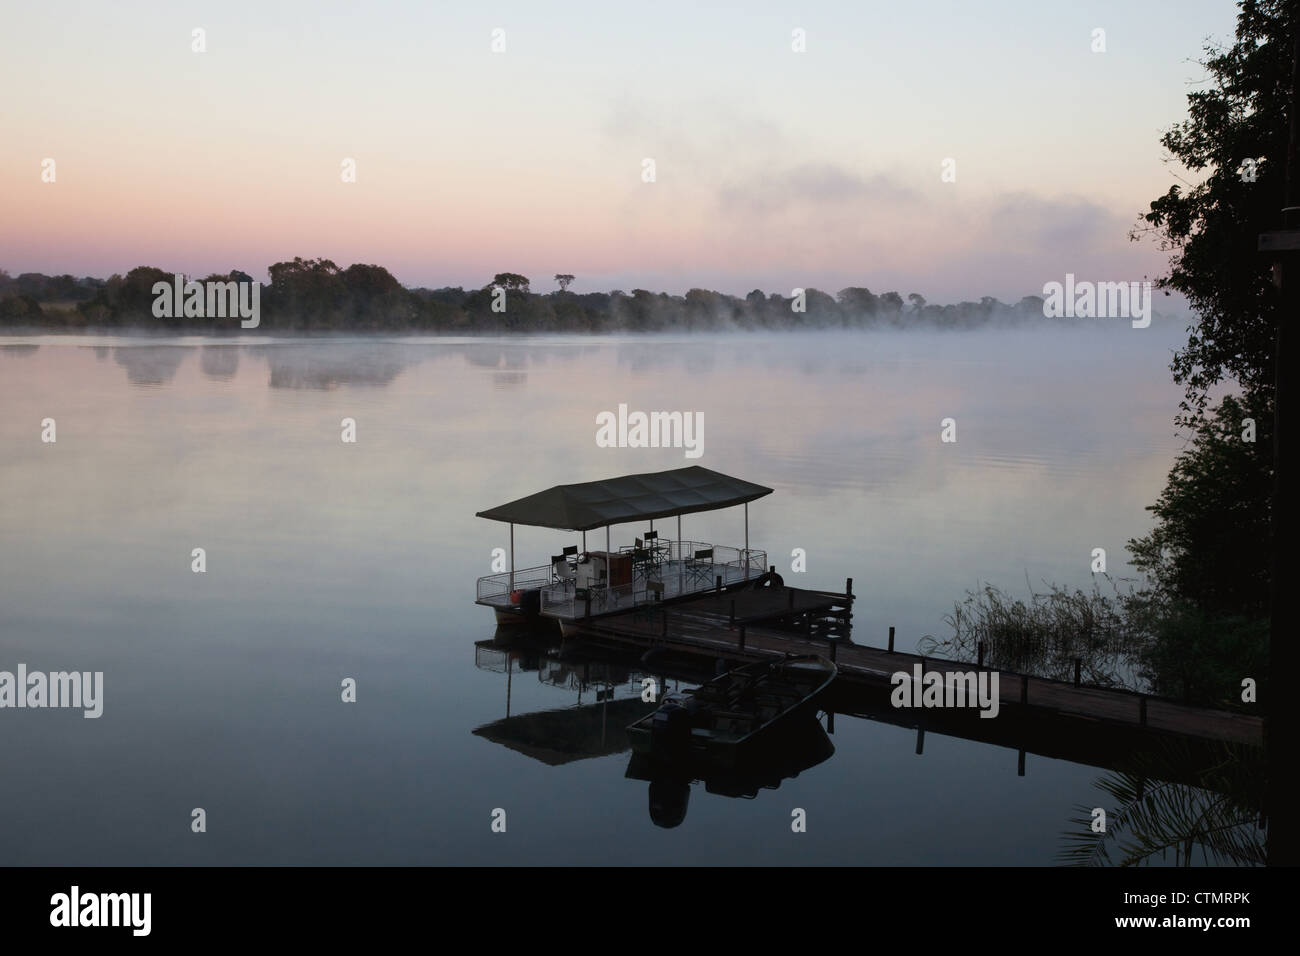 Game viewing boat on Kafue River at sunrise, Kafue National Park, Zambia, Africa Stock Photo